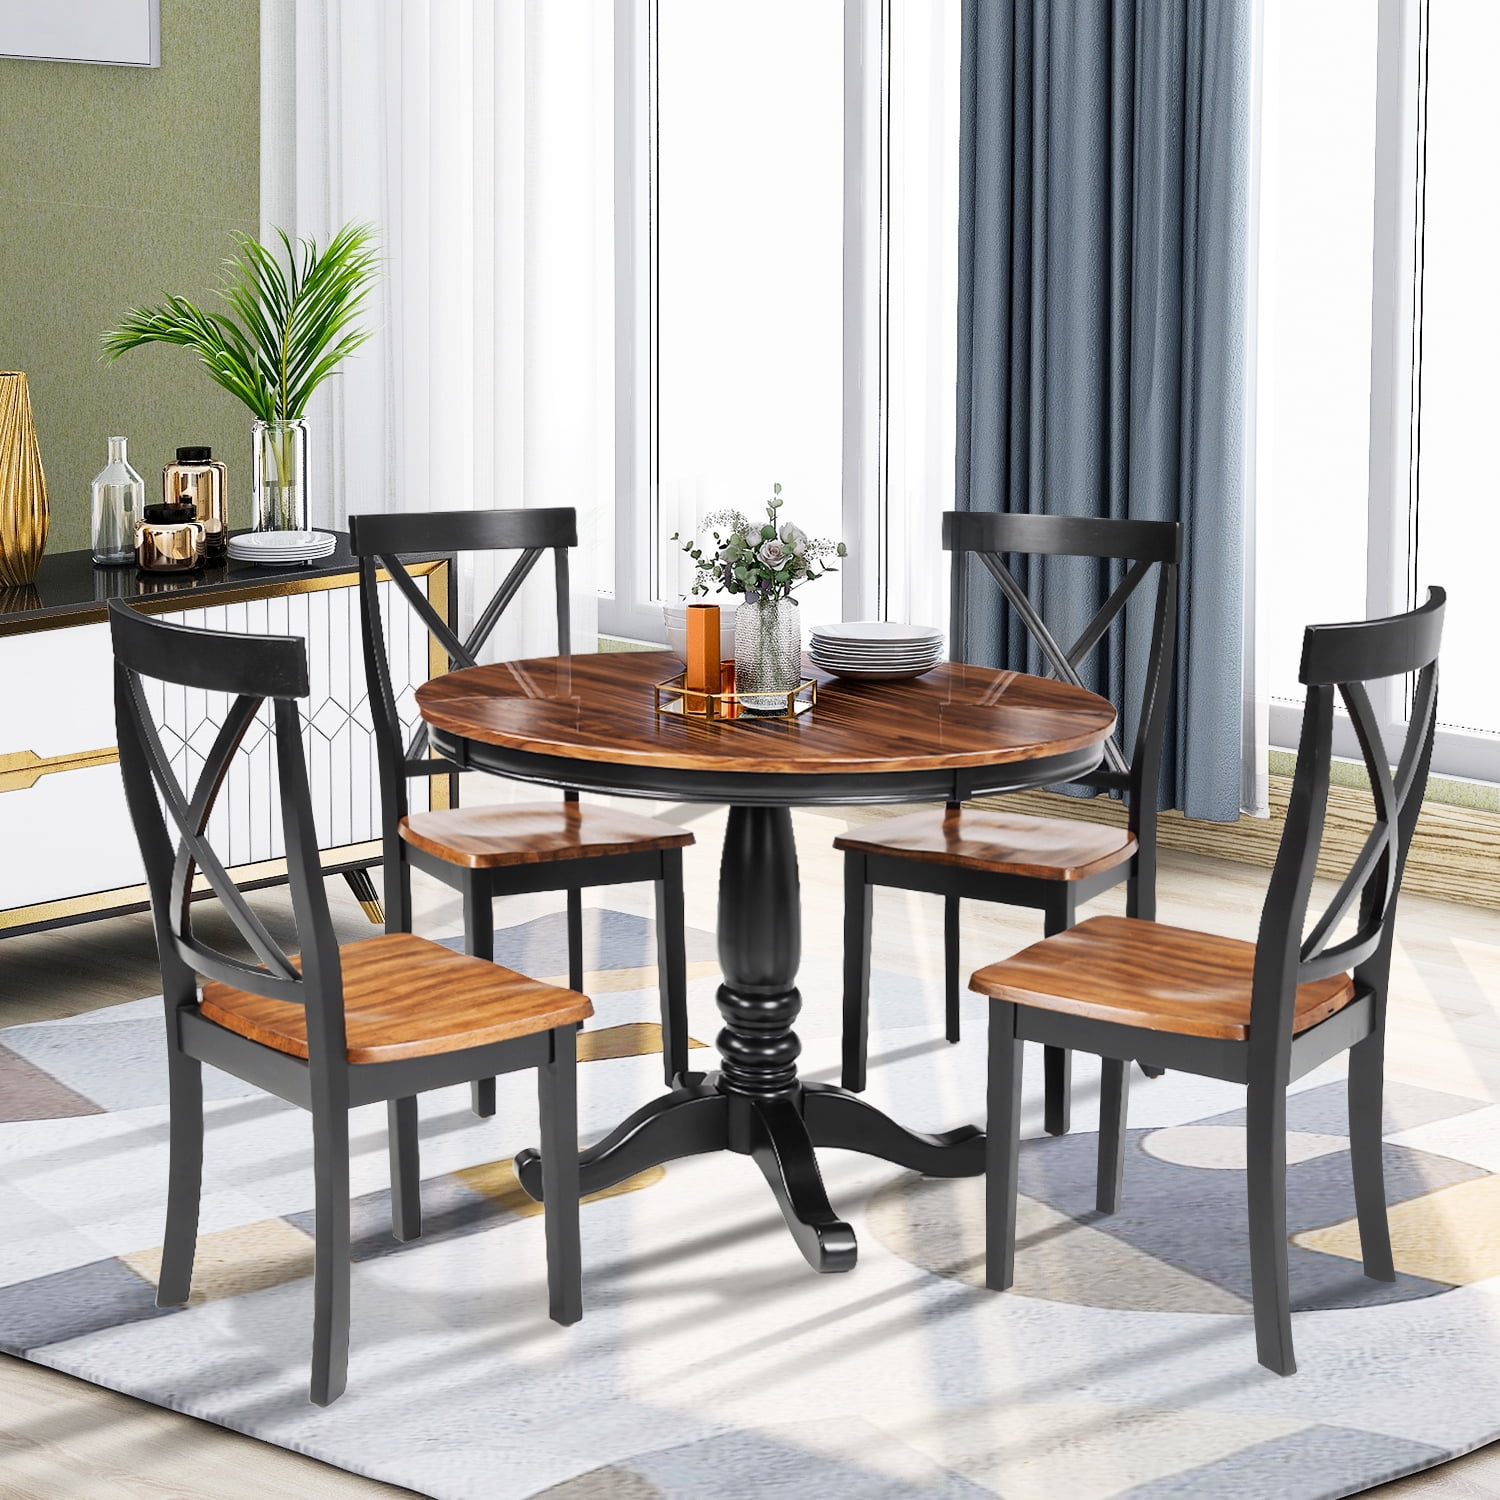 Round Dining Room Table Set for 4 Persons, 5 Piece Dining Room Table